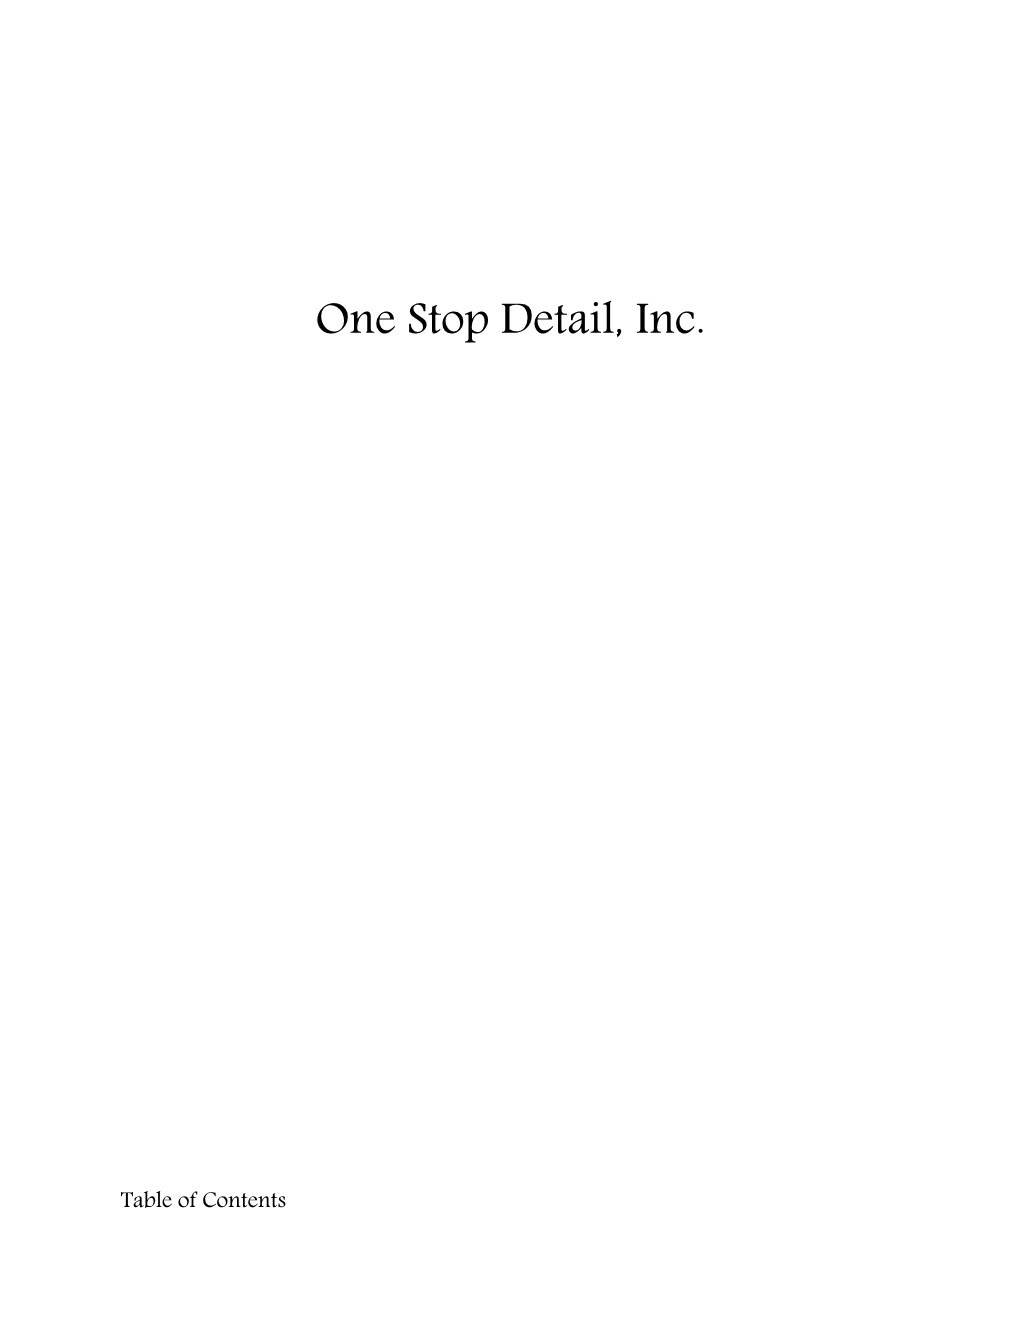 One Stop Detail, Inc